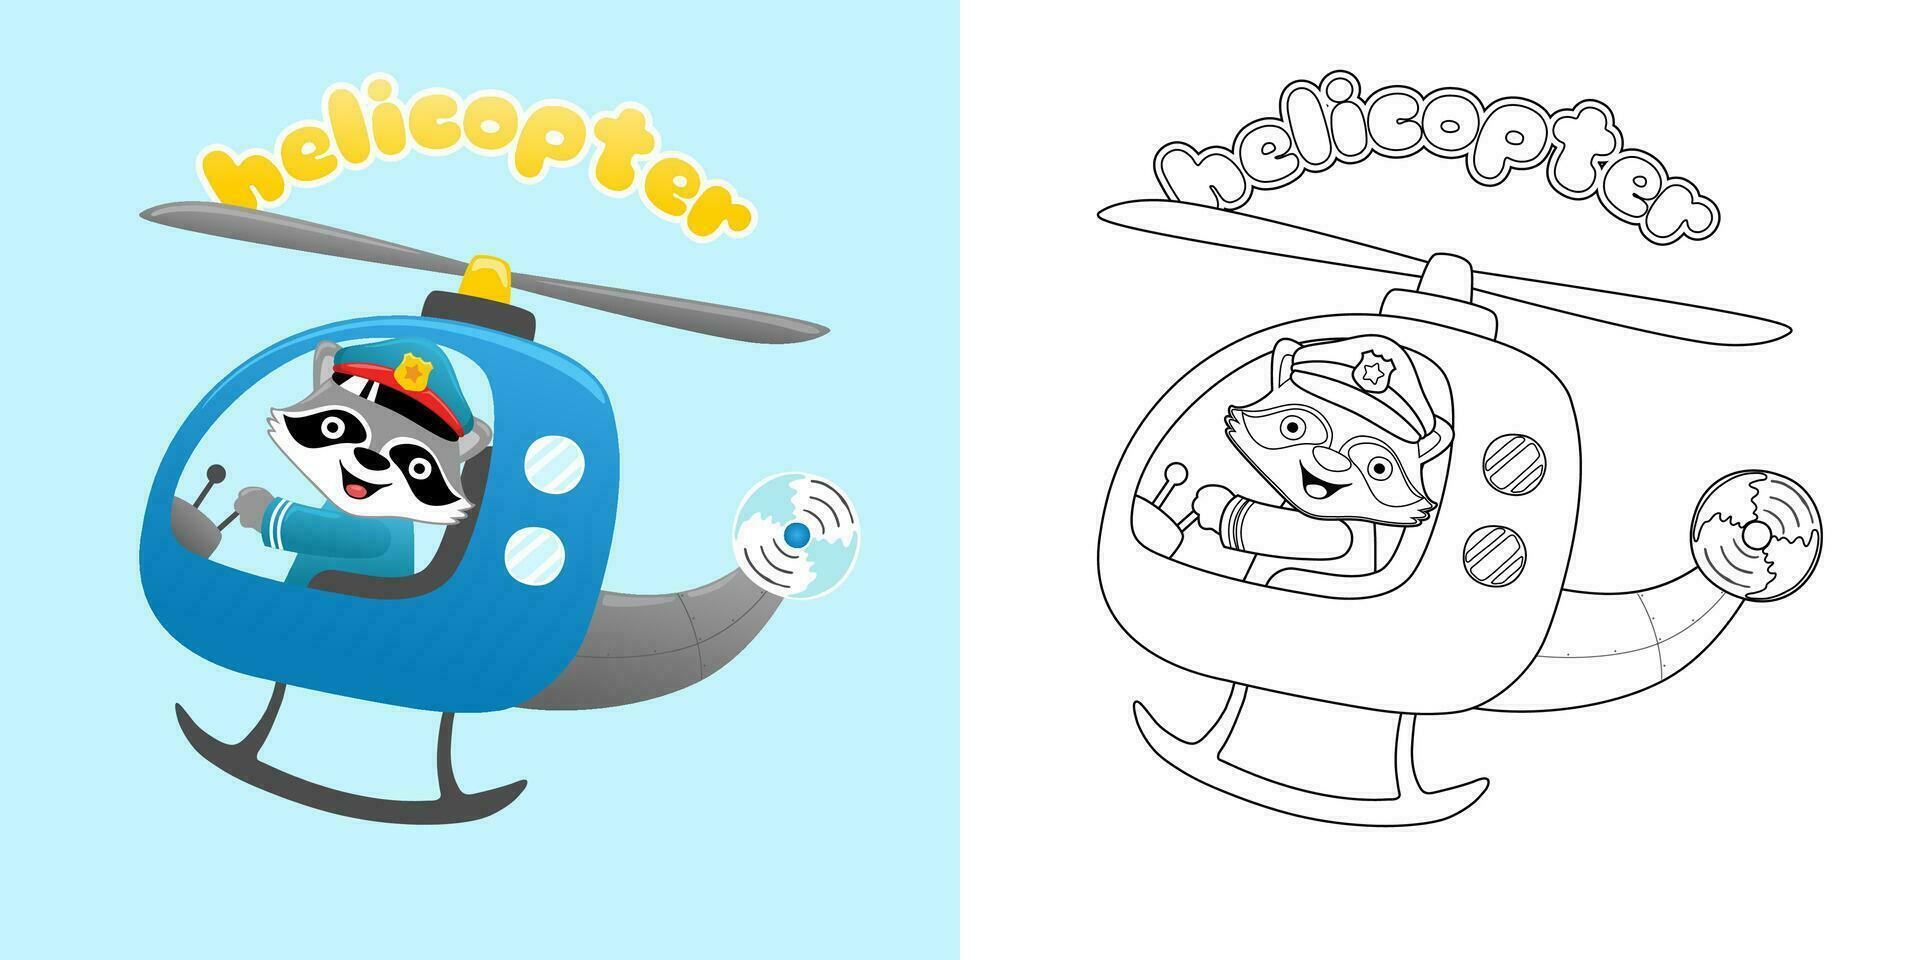 Vector illustration of cartoon funny raccoon in pilot cap on helicopter. Coloring book or page